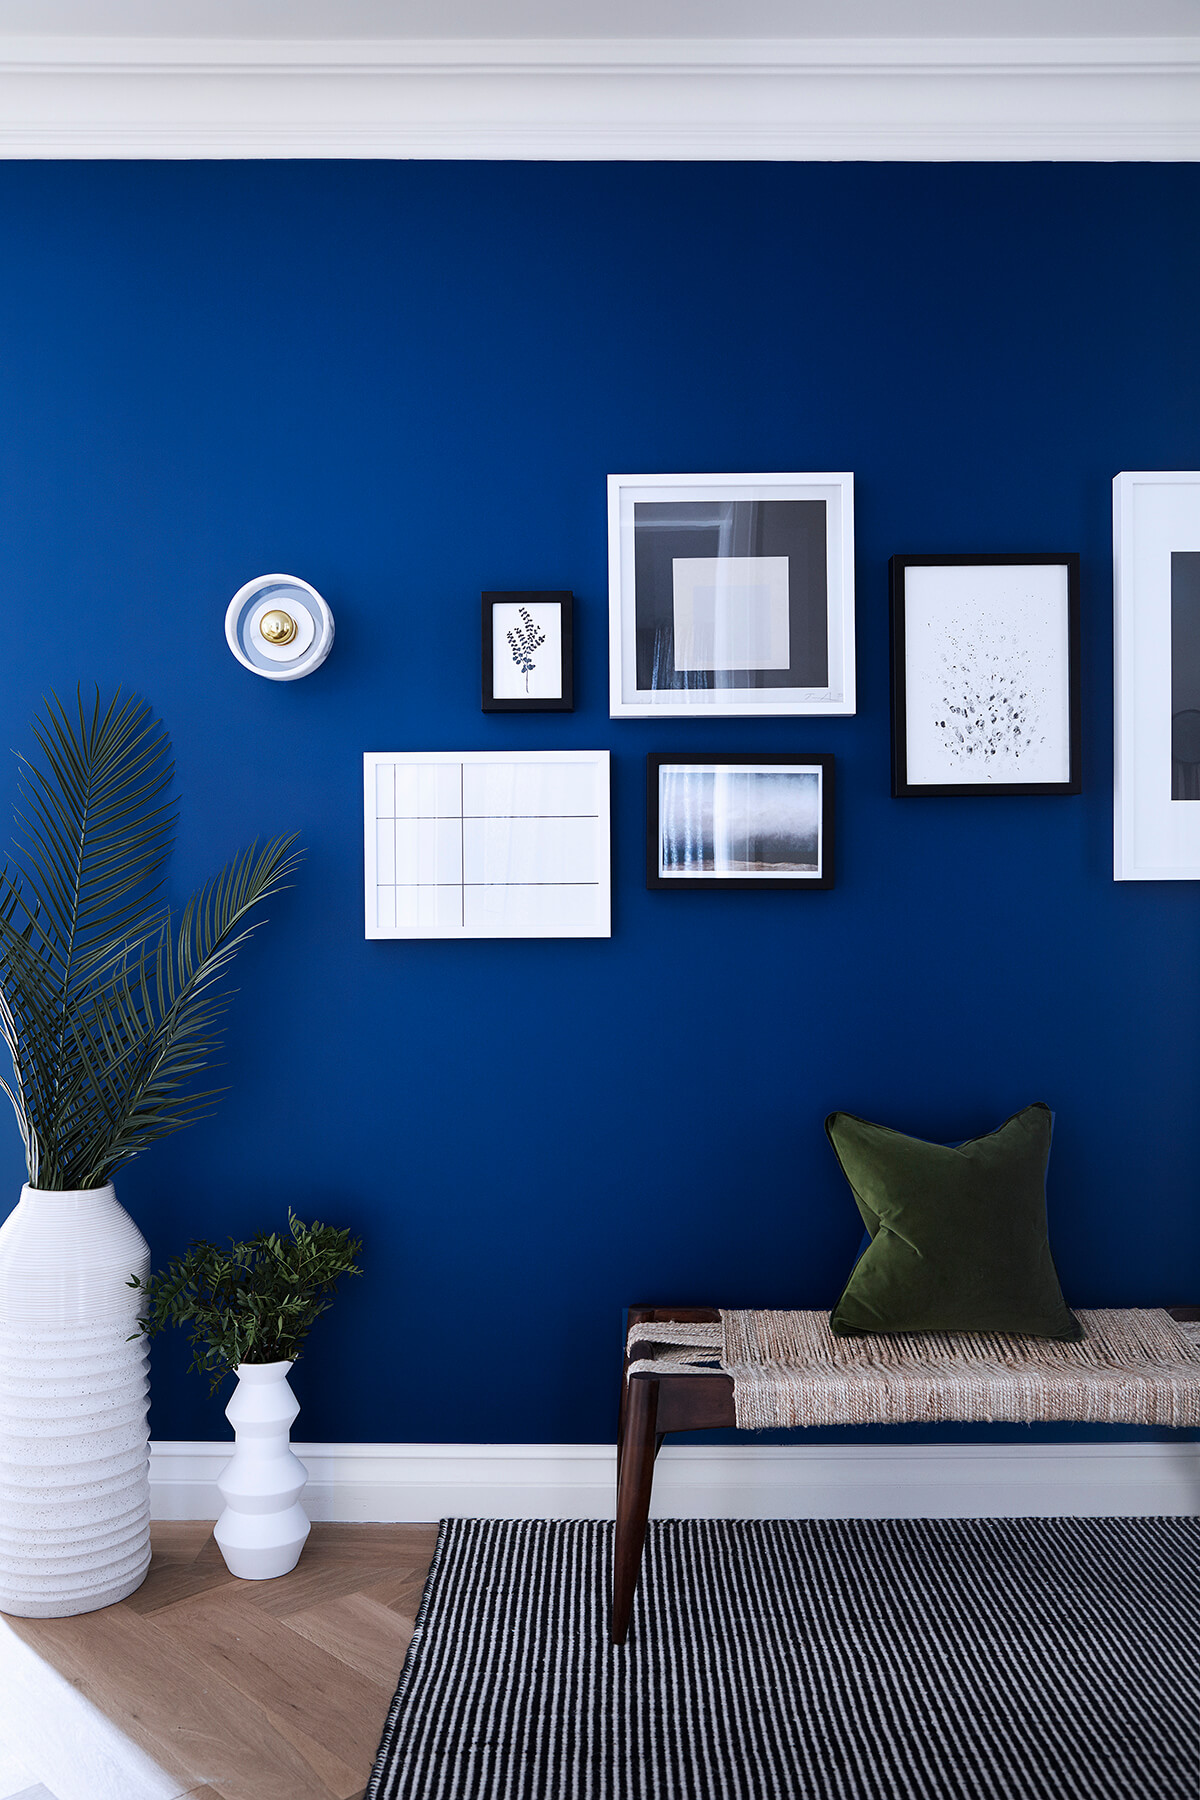 Bright interiors with blue wall, potted plants and images hanging